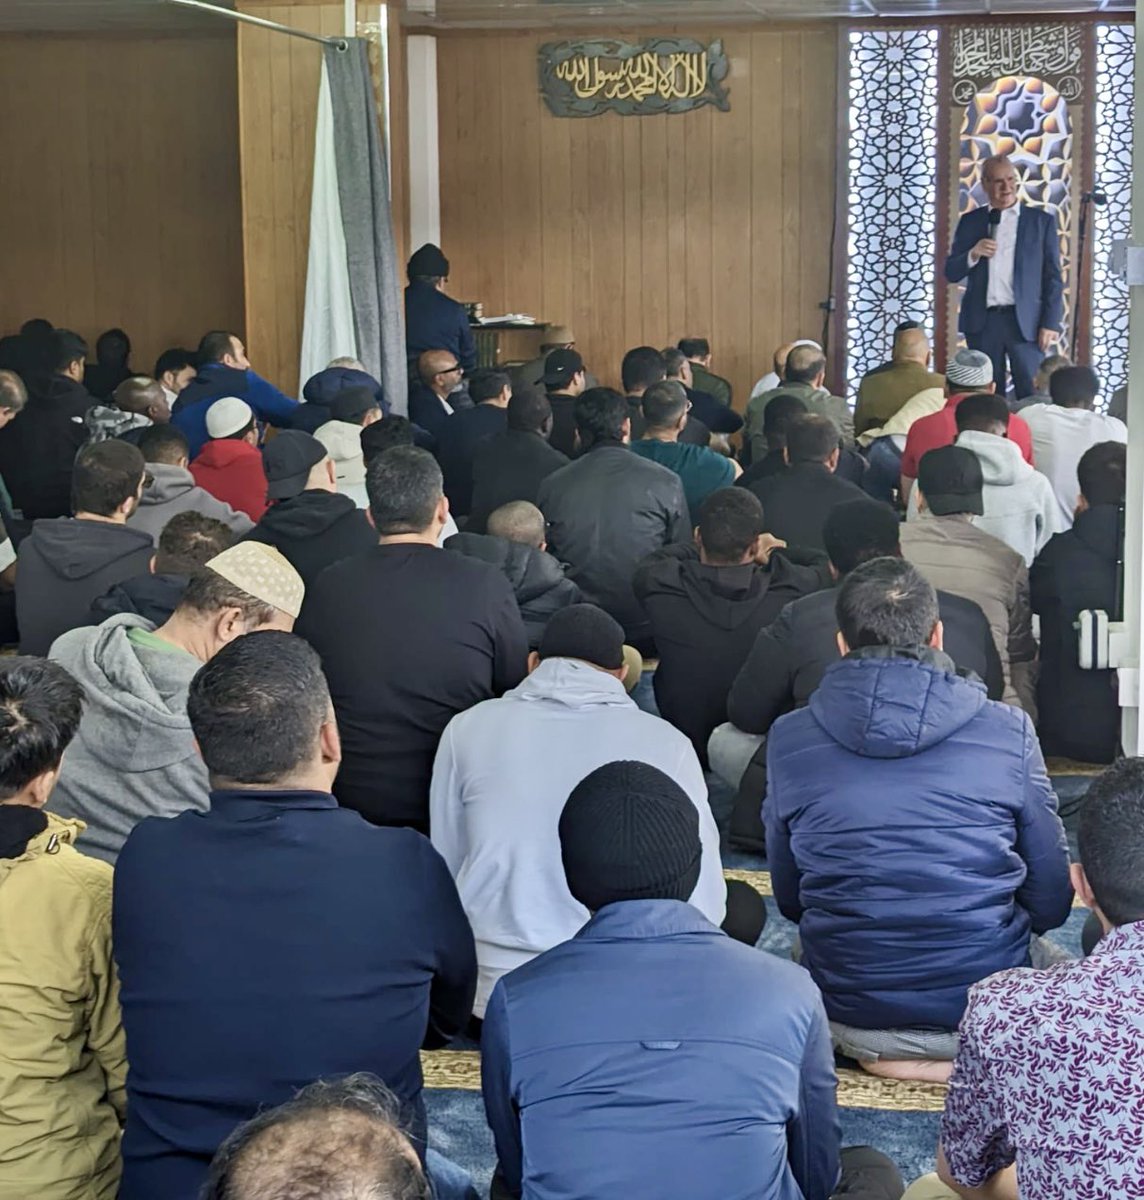 Fantastic visit to the new Perth Mosque and was thrilled to say a few words to the new extended congregation. I have supported the Perth Islamic Society through all its efforts to secure new premises and delighted progress has been made.